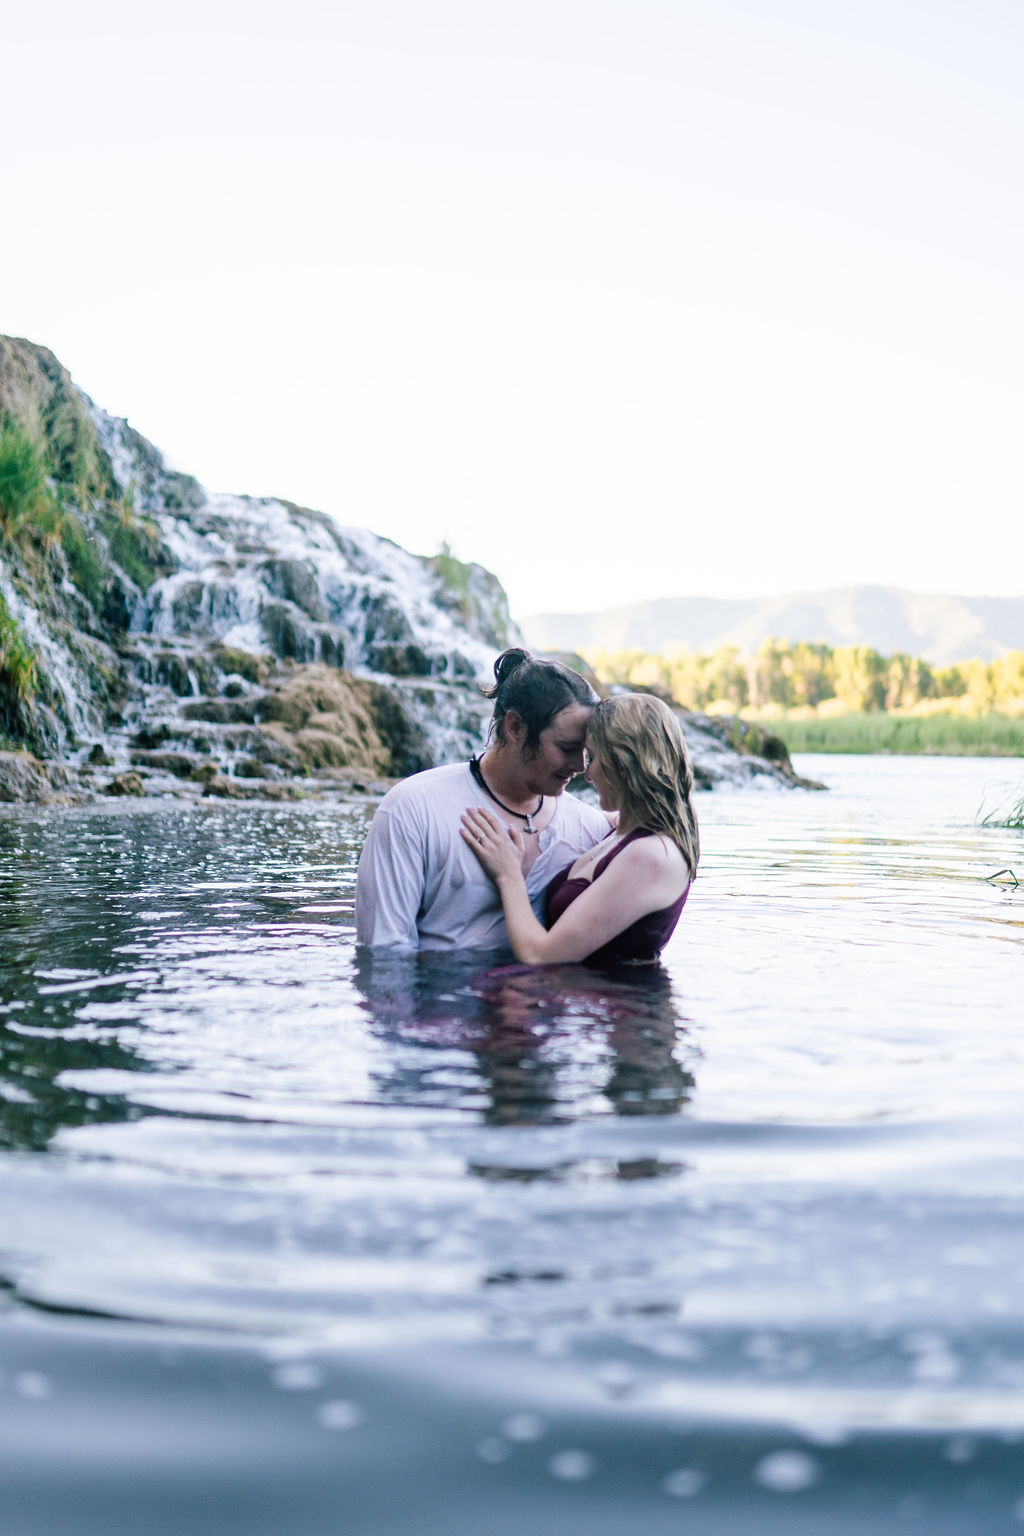 engagement session in a lake at some waterfalls in the Smokies with man and woman sitting in the water and embracing each other romantically